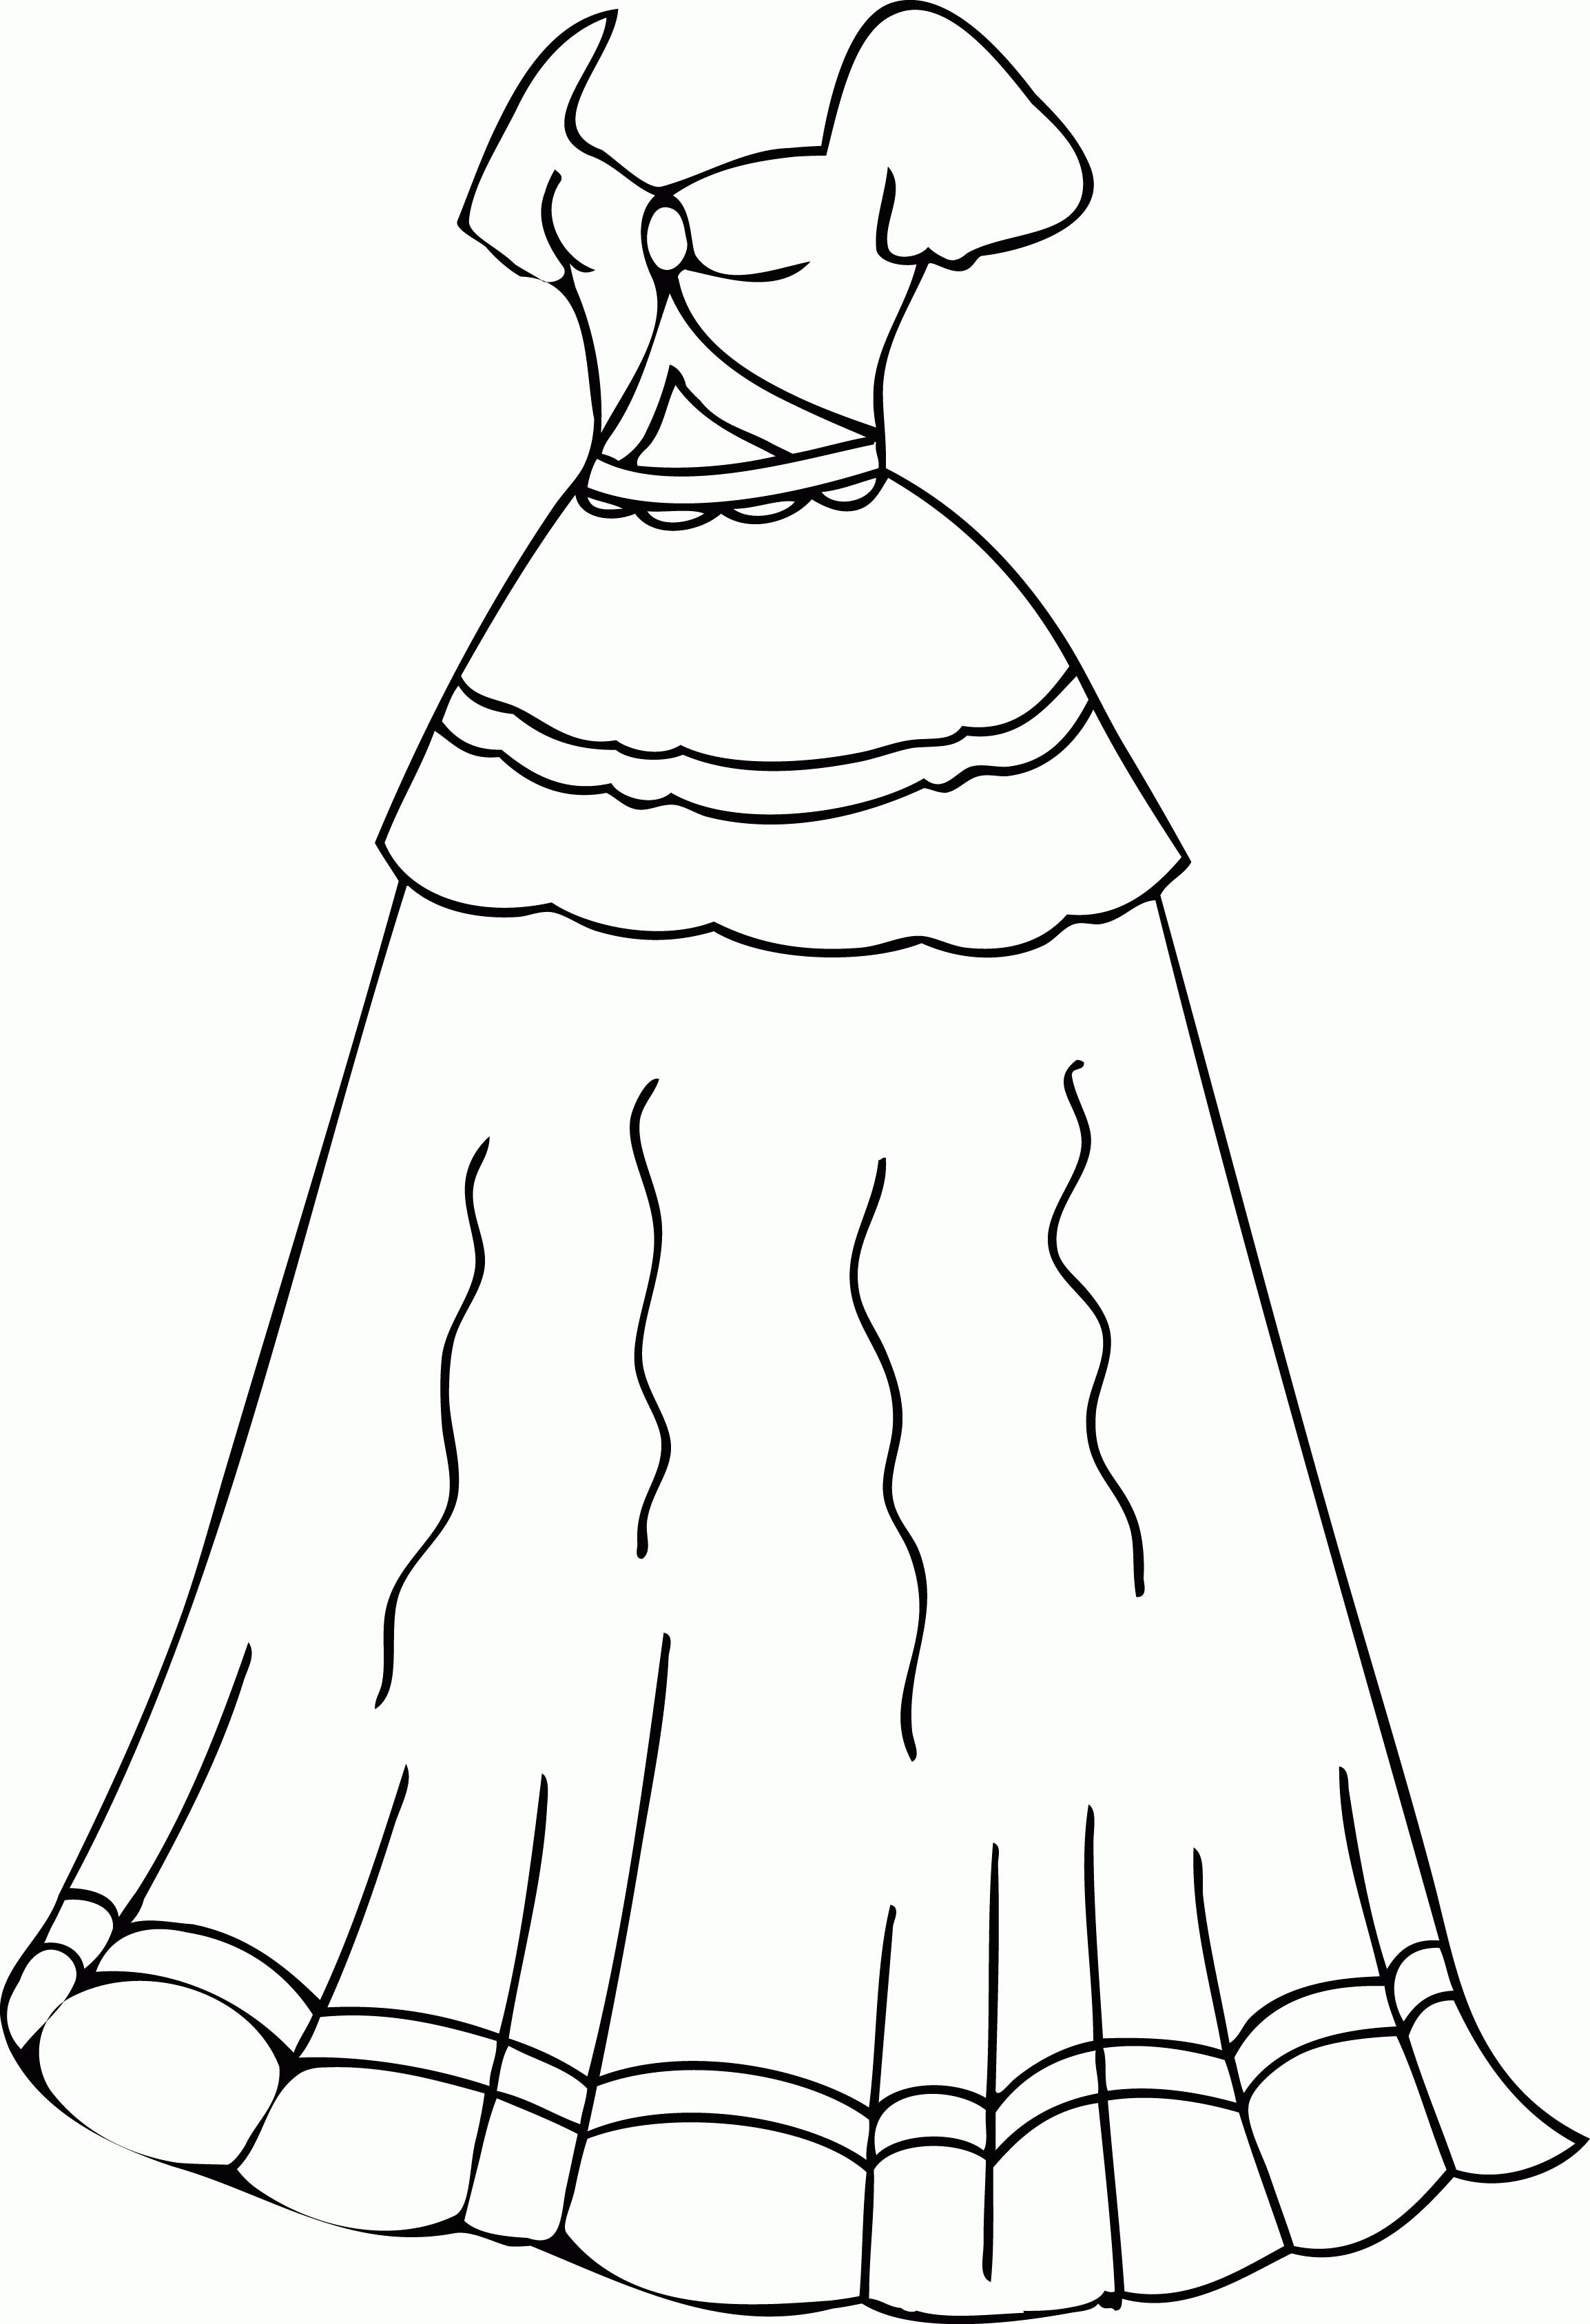 colouring pages dresses coloring pages dress coloring home colouring dresses pages 